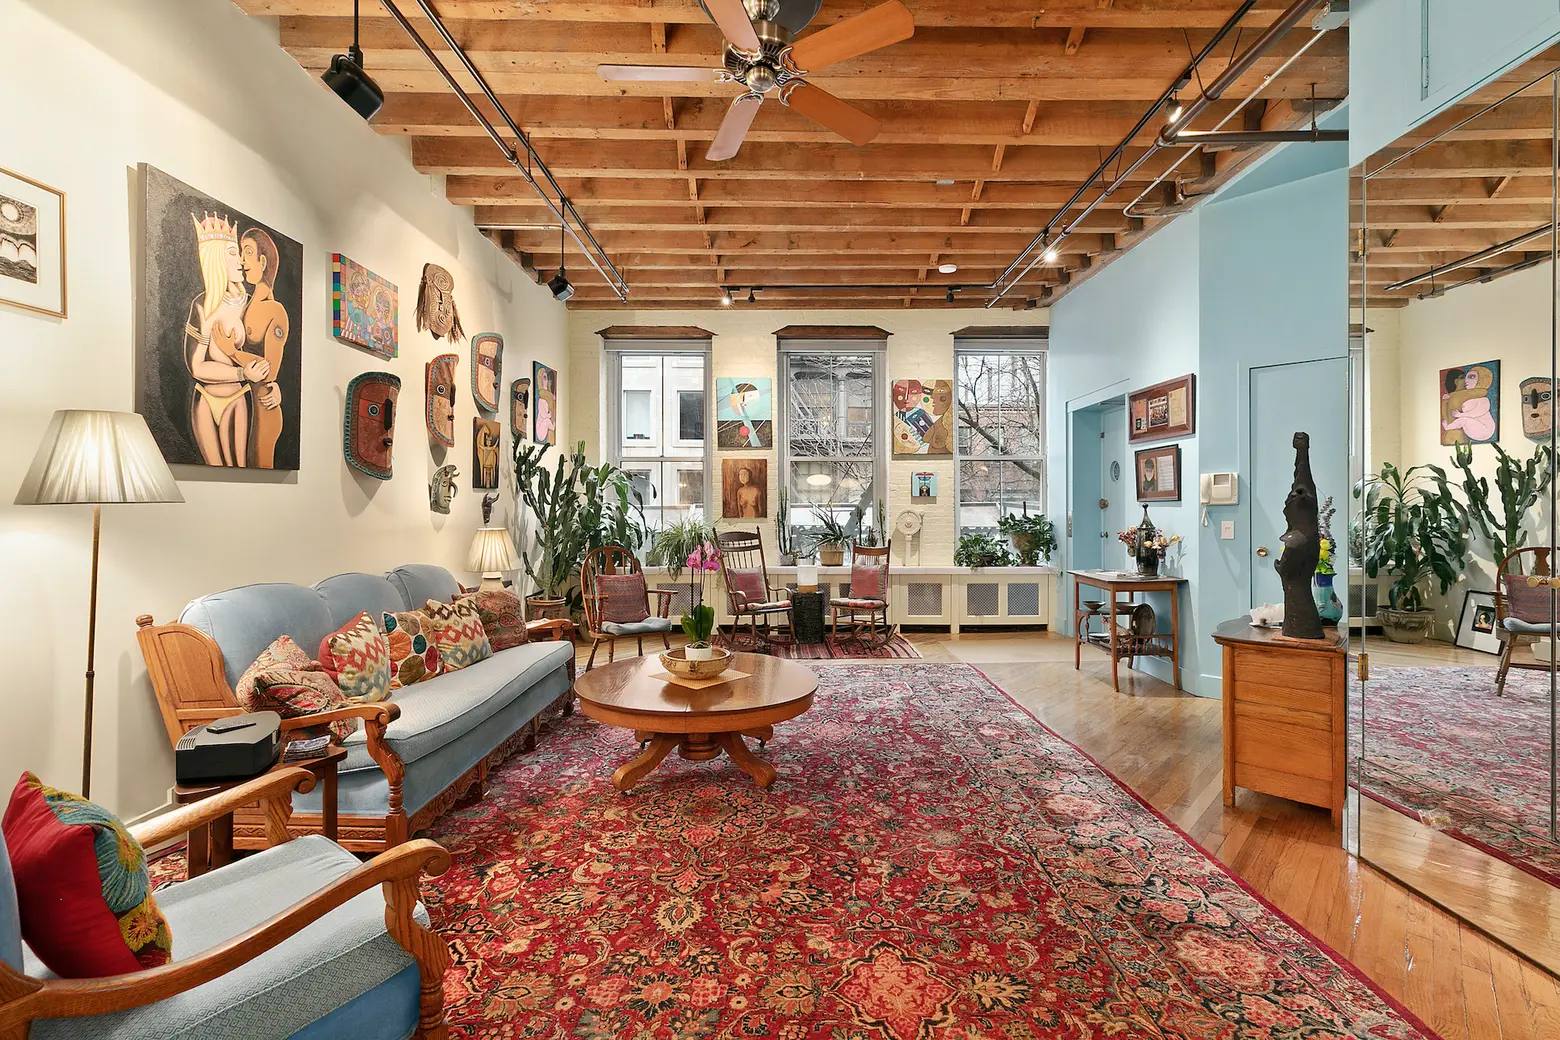 This $2.6M classic Soho loft is a collector’s dream